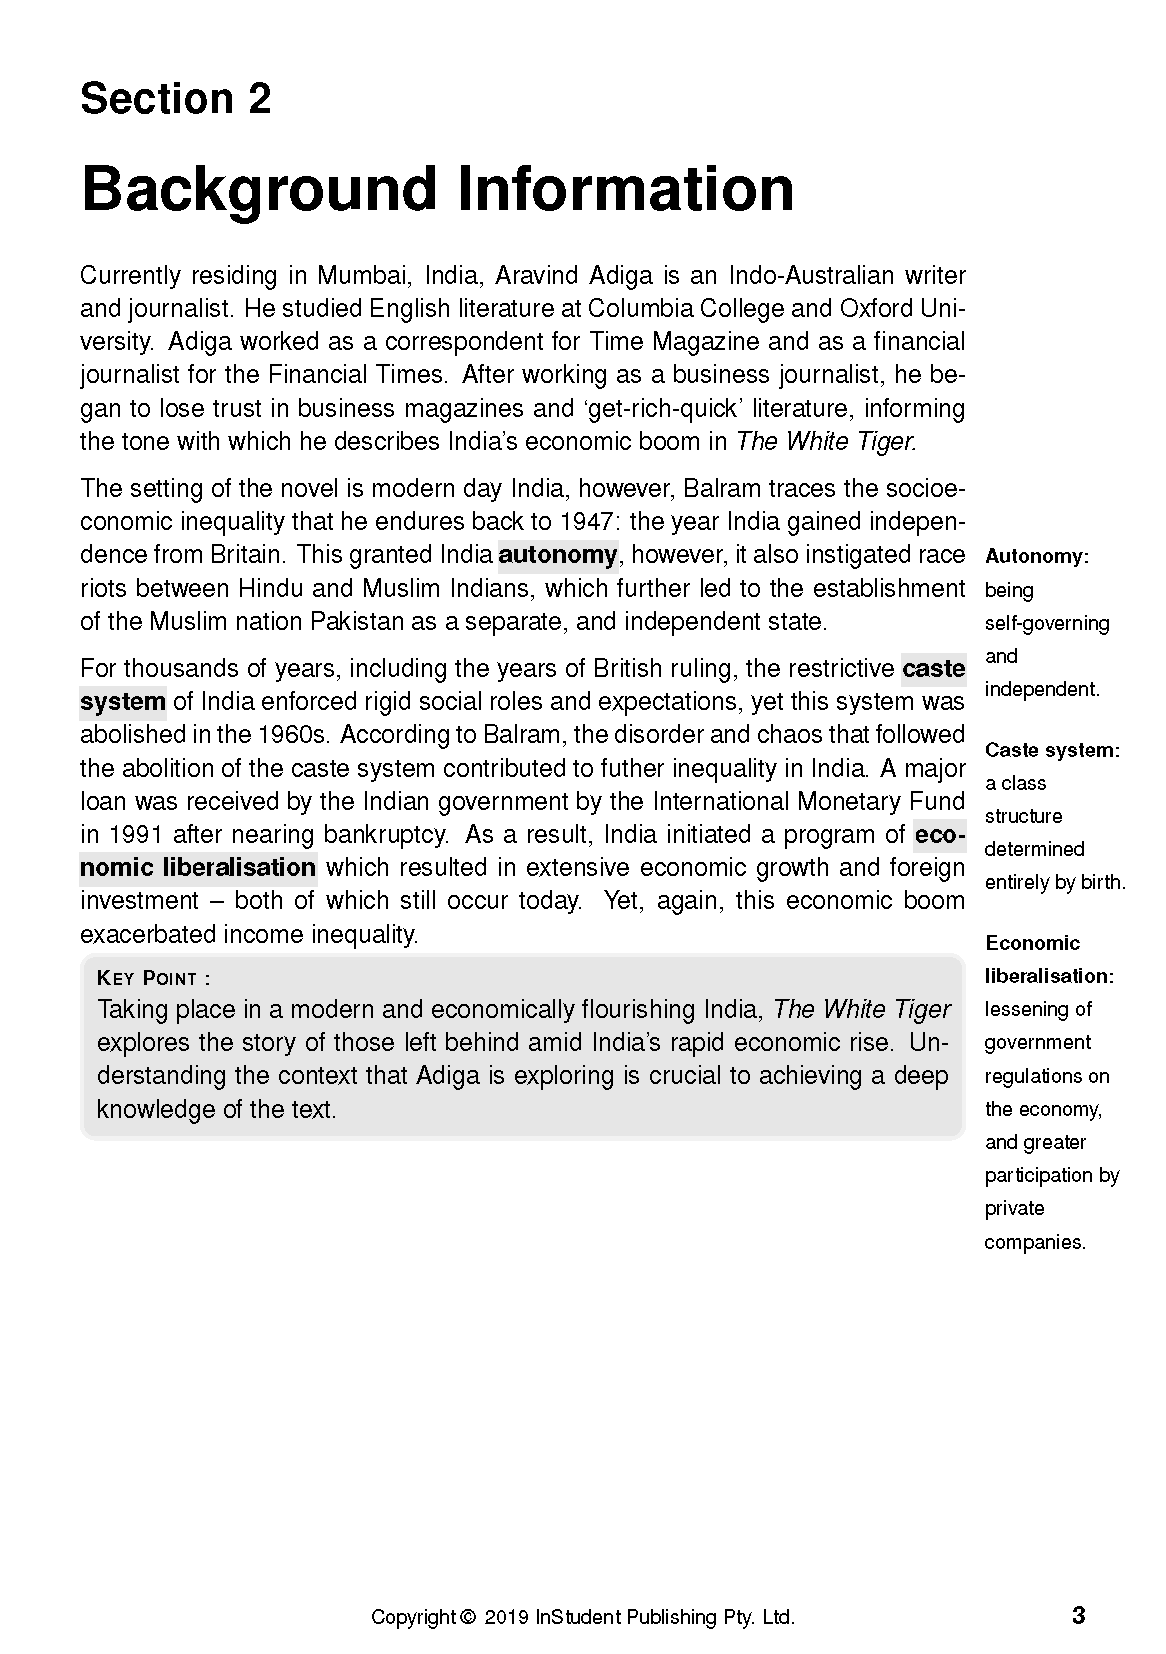 Text Guide: The White Tiger by Aravind Adiga